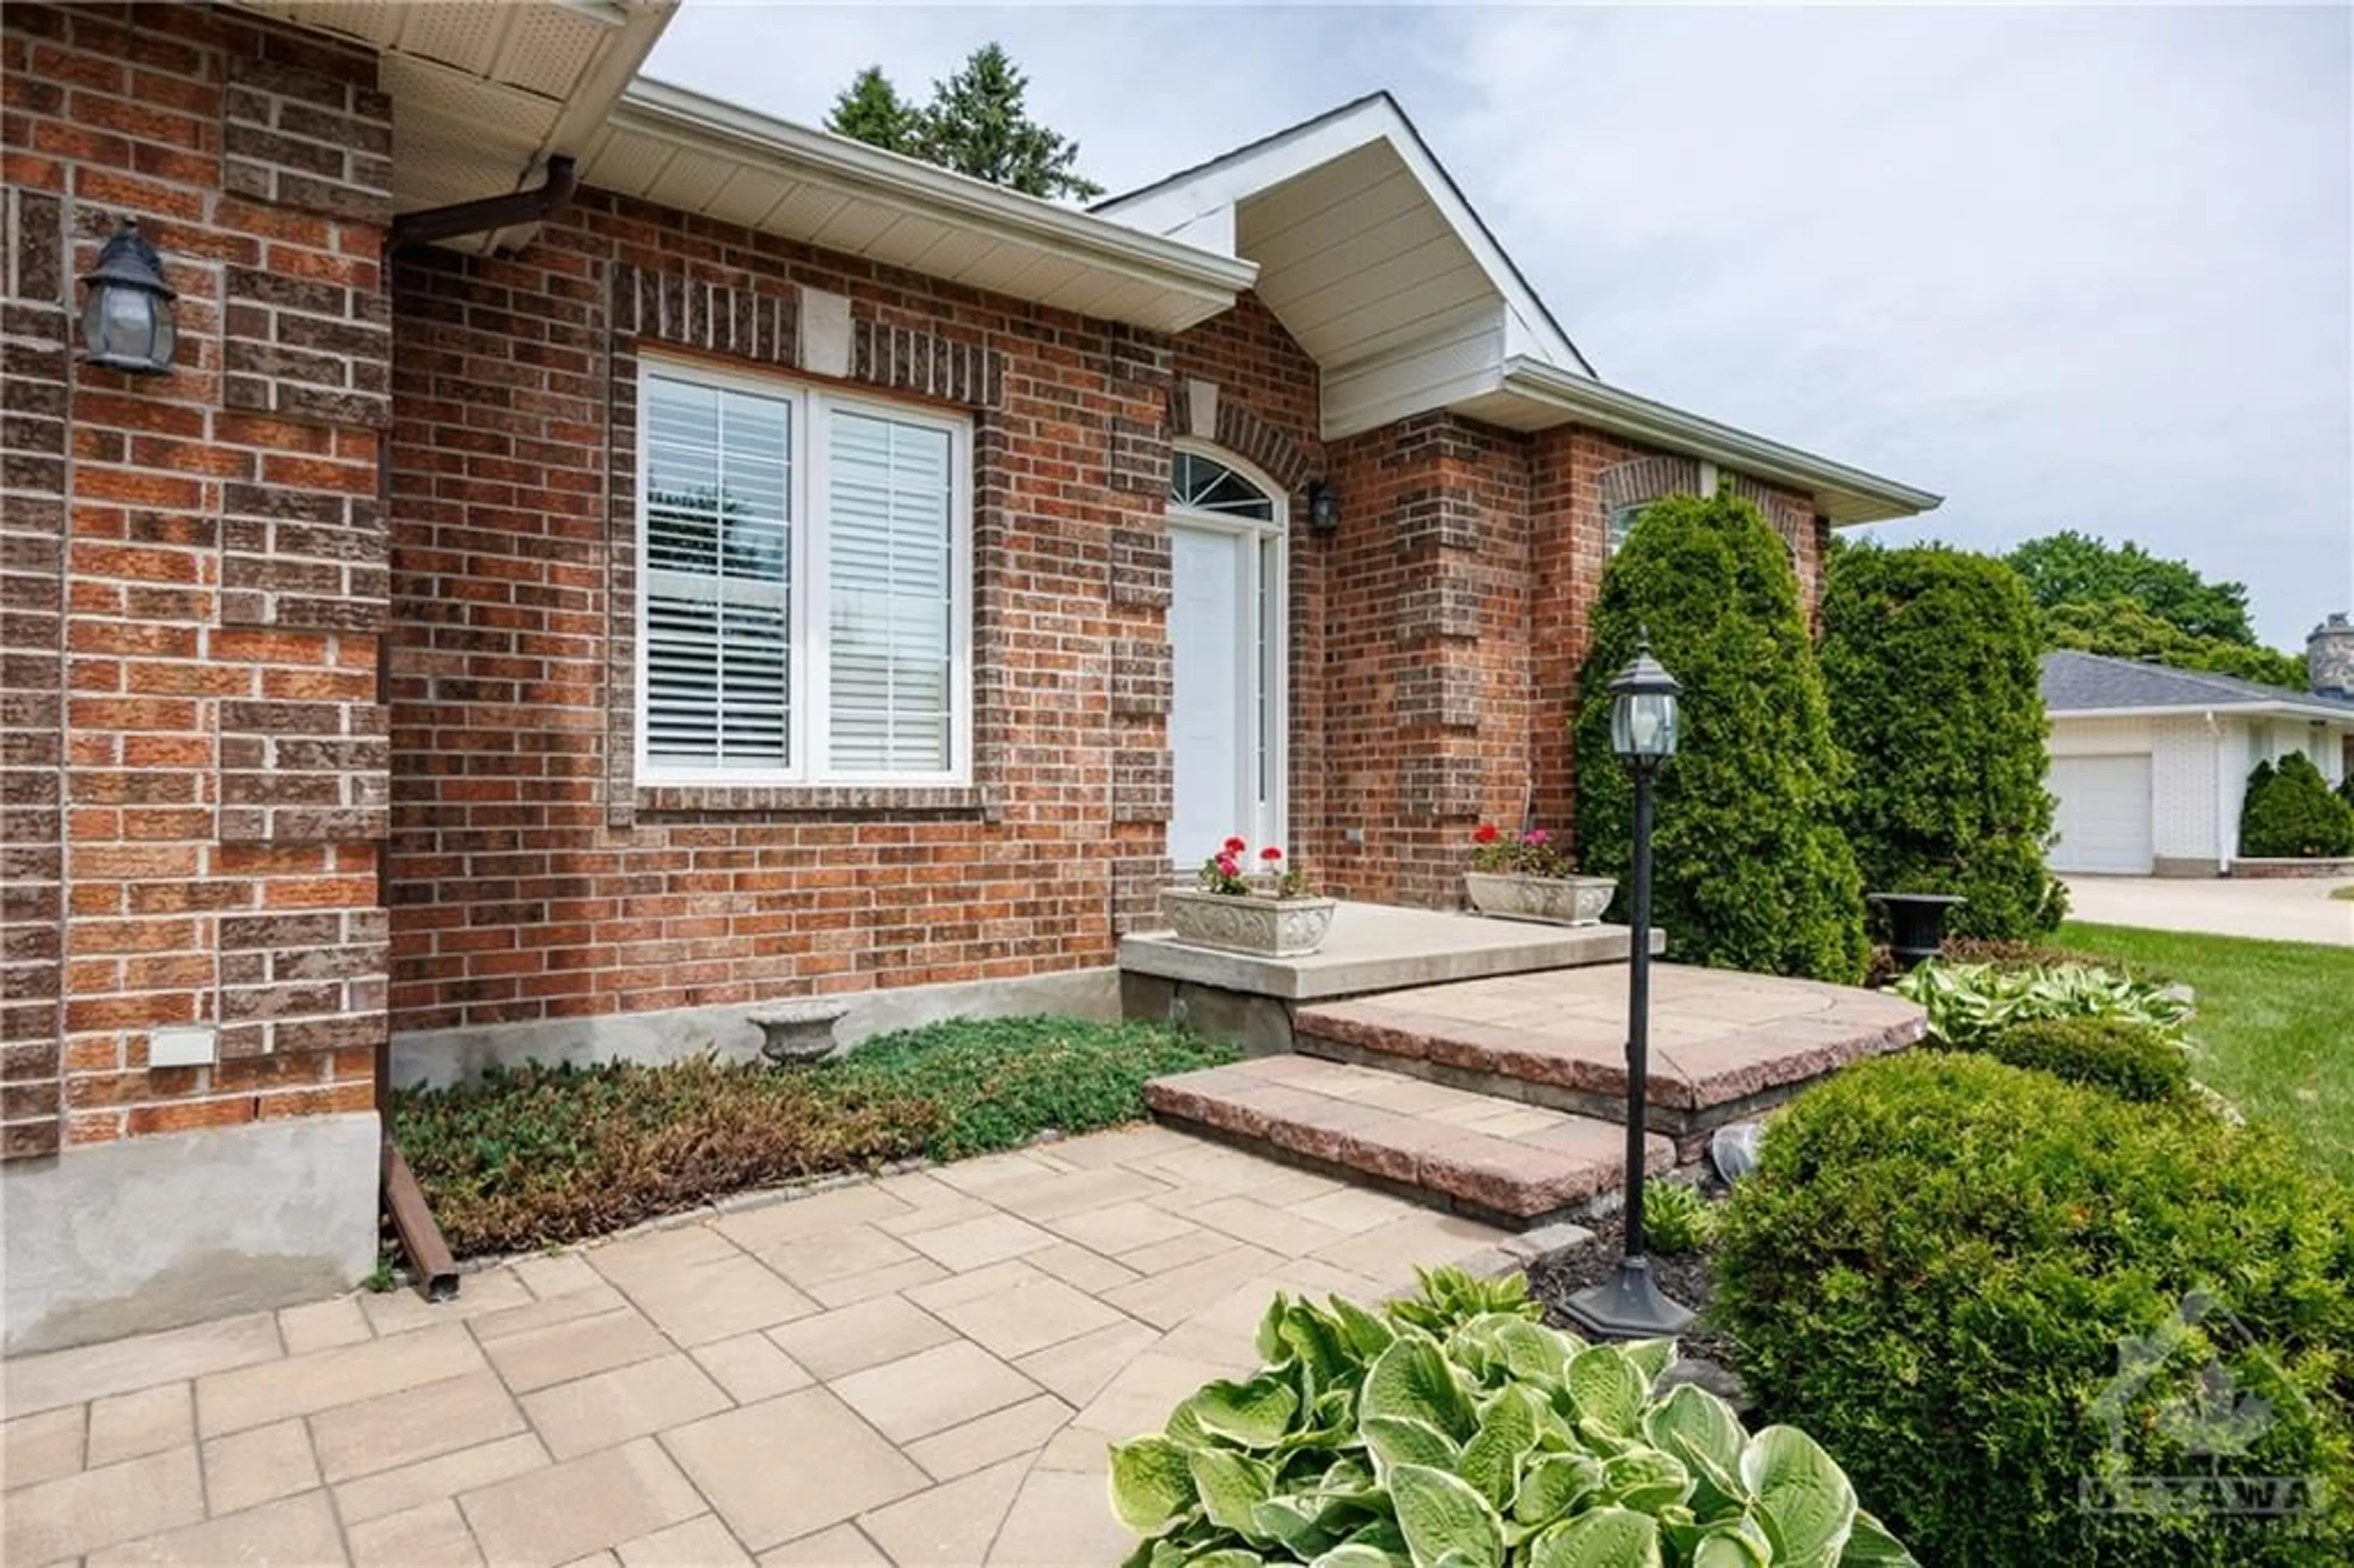 Home with brick exterior material for 243 MARILYN Ave, Ottawa Ontario K1V 7E4